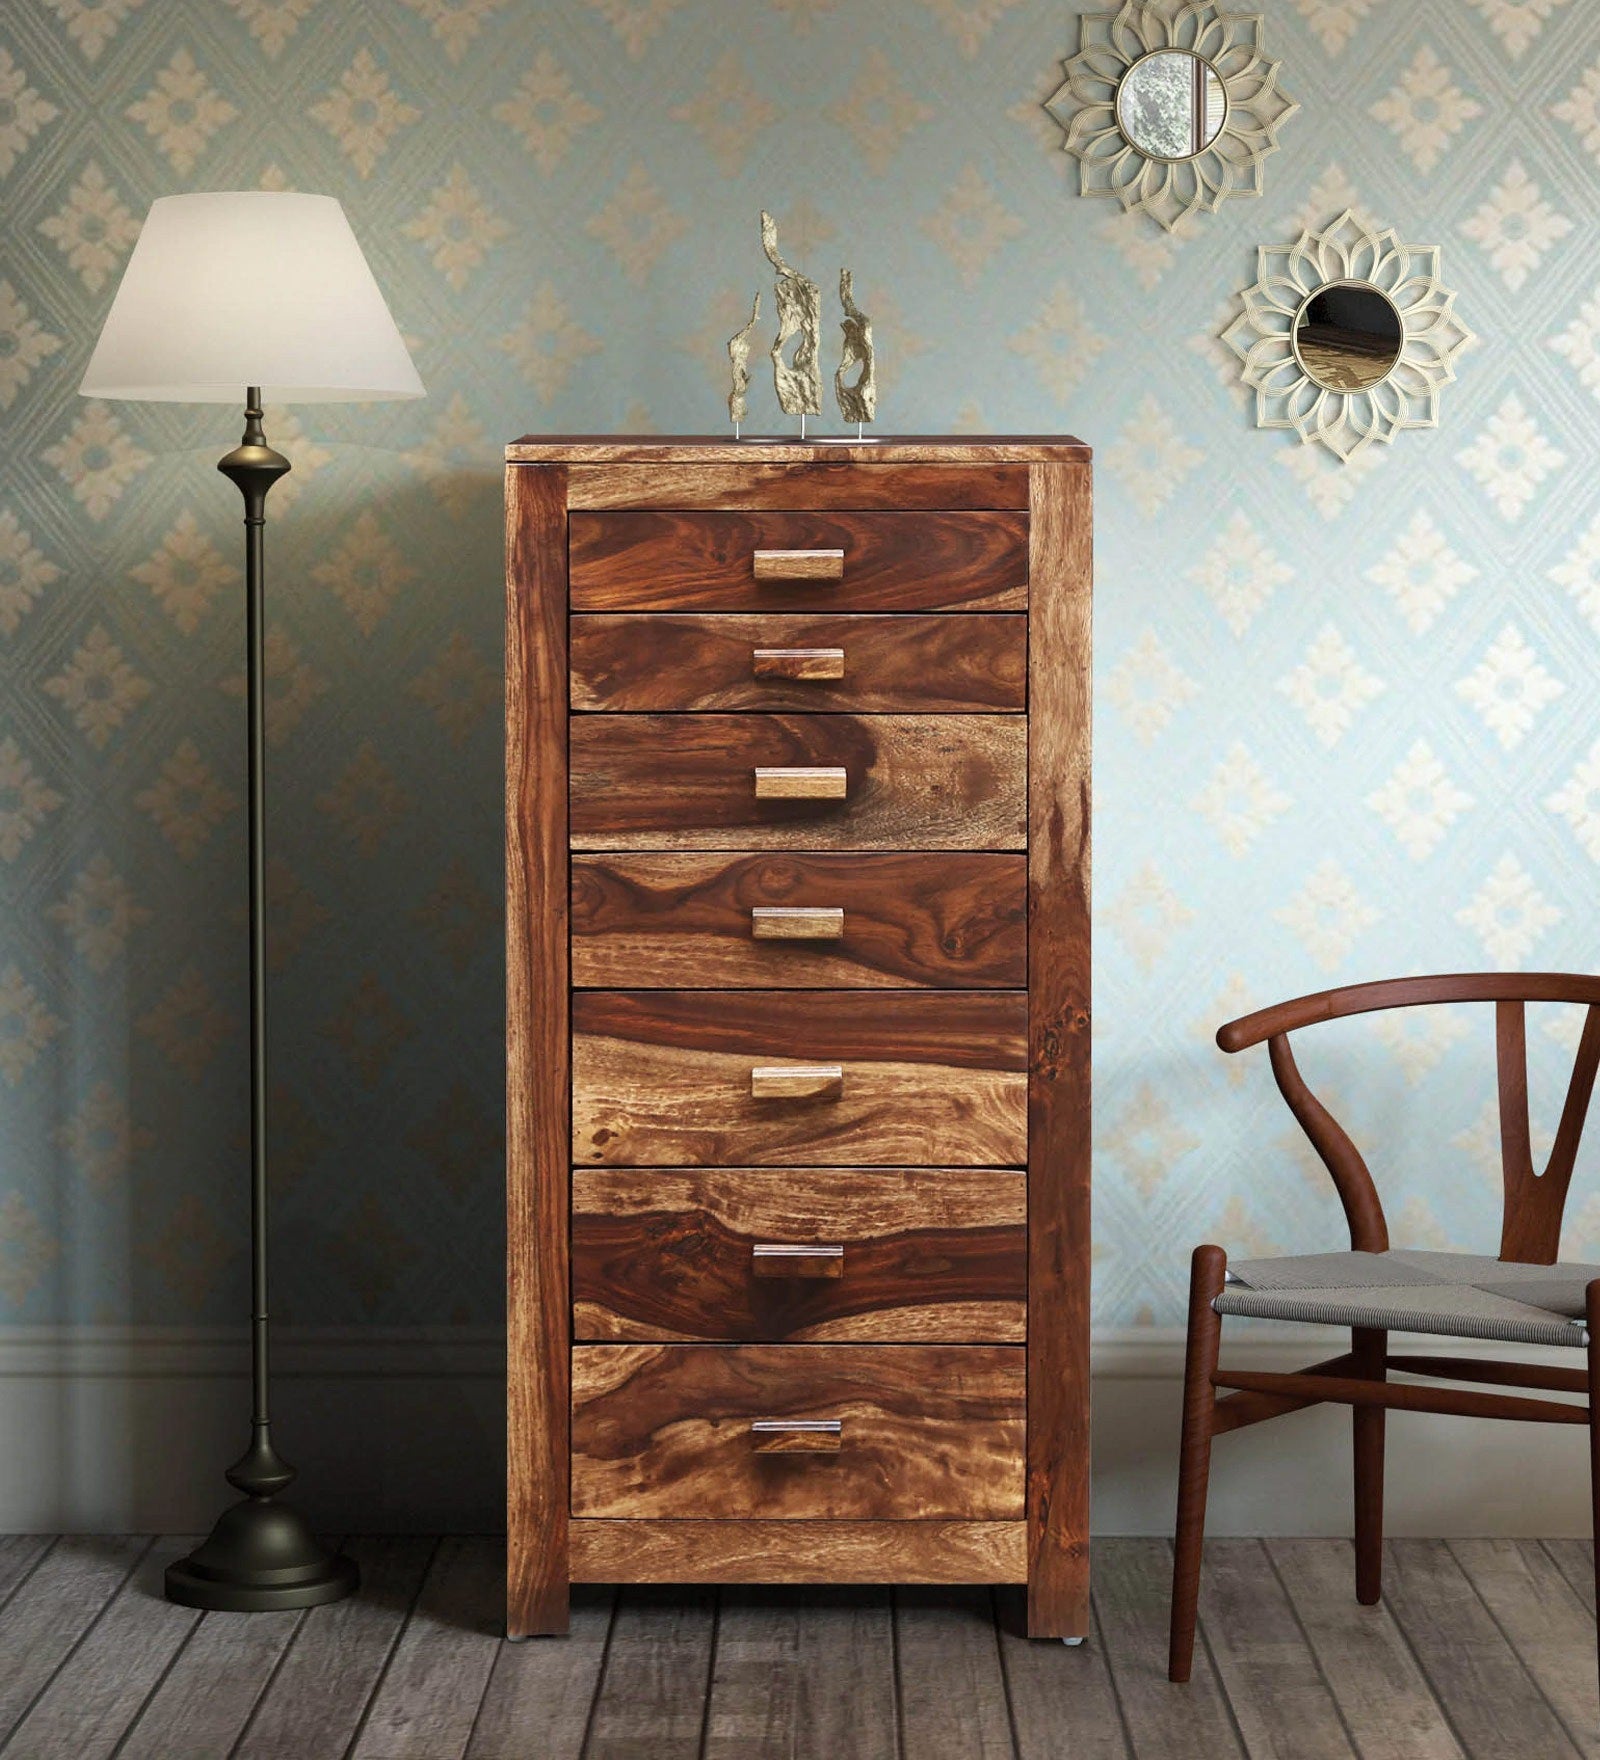 Acro Wooden Chest Of Drawers For Living Room - Rajwada Furnish